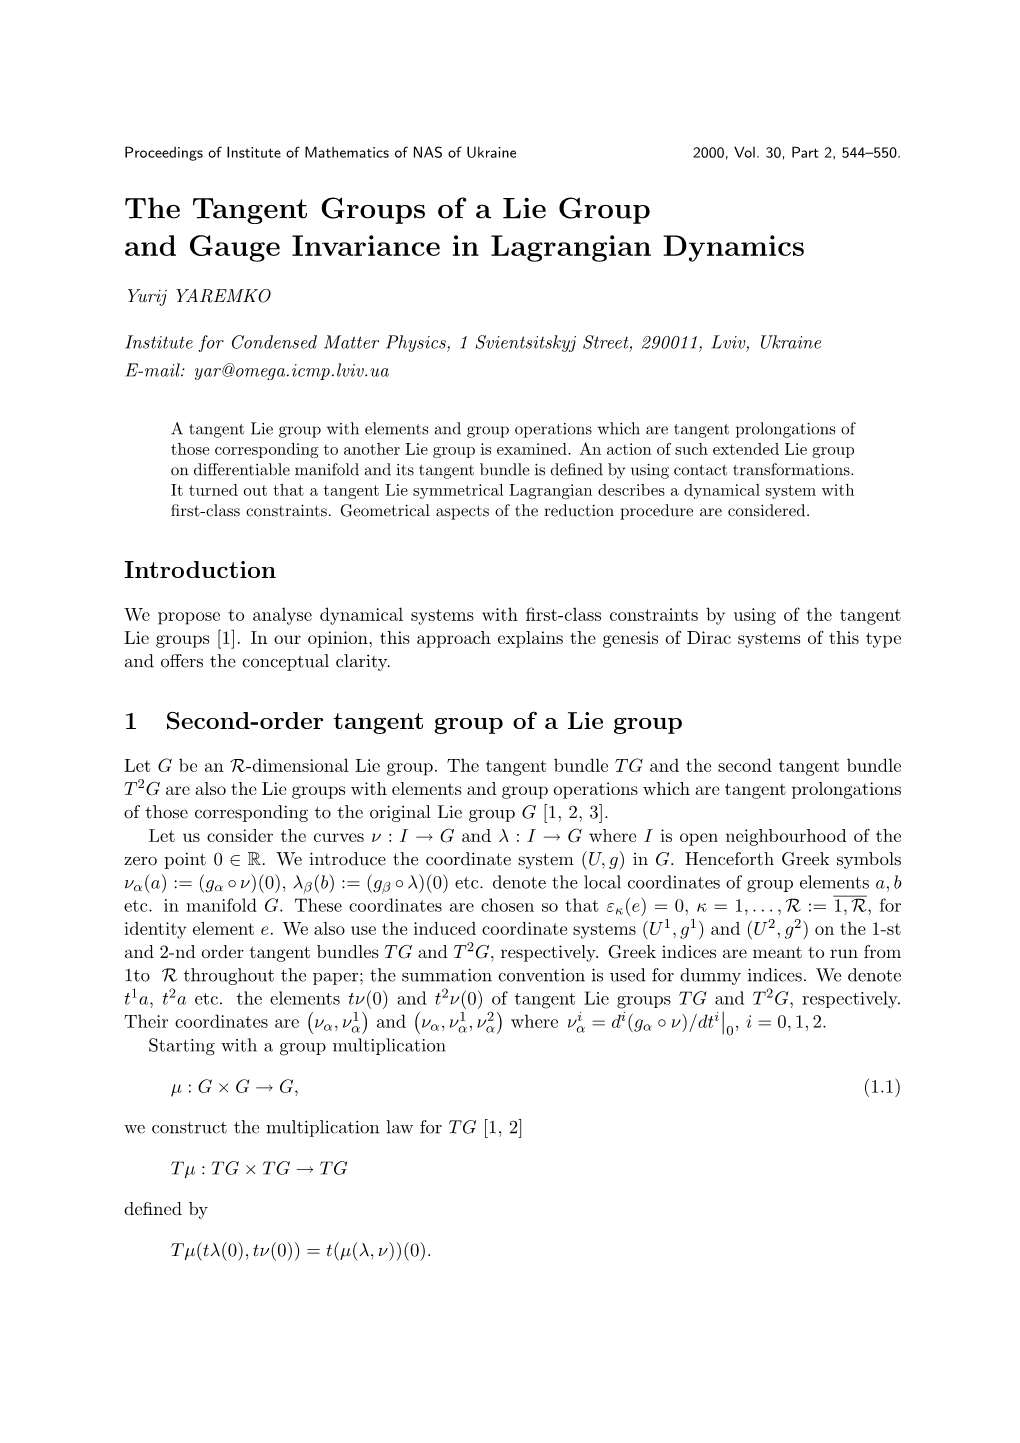 The Tangent Groups of a Lie Group and Gauge Invariance in Lagrangian Dynamics